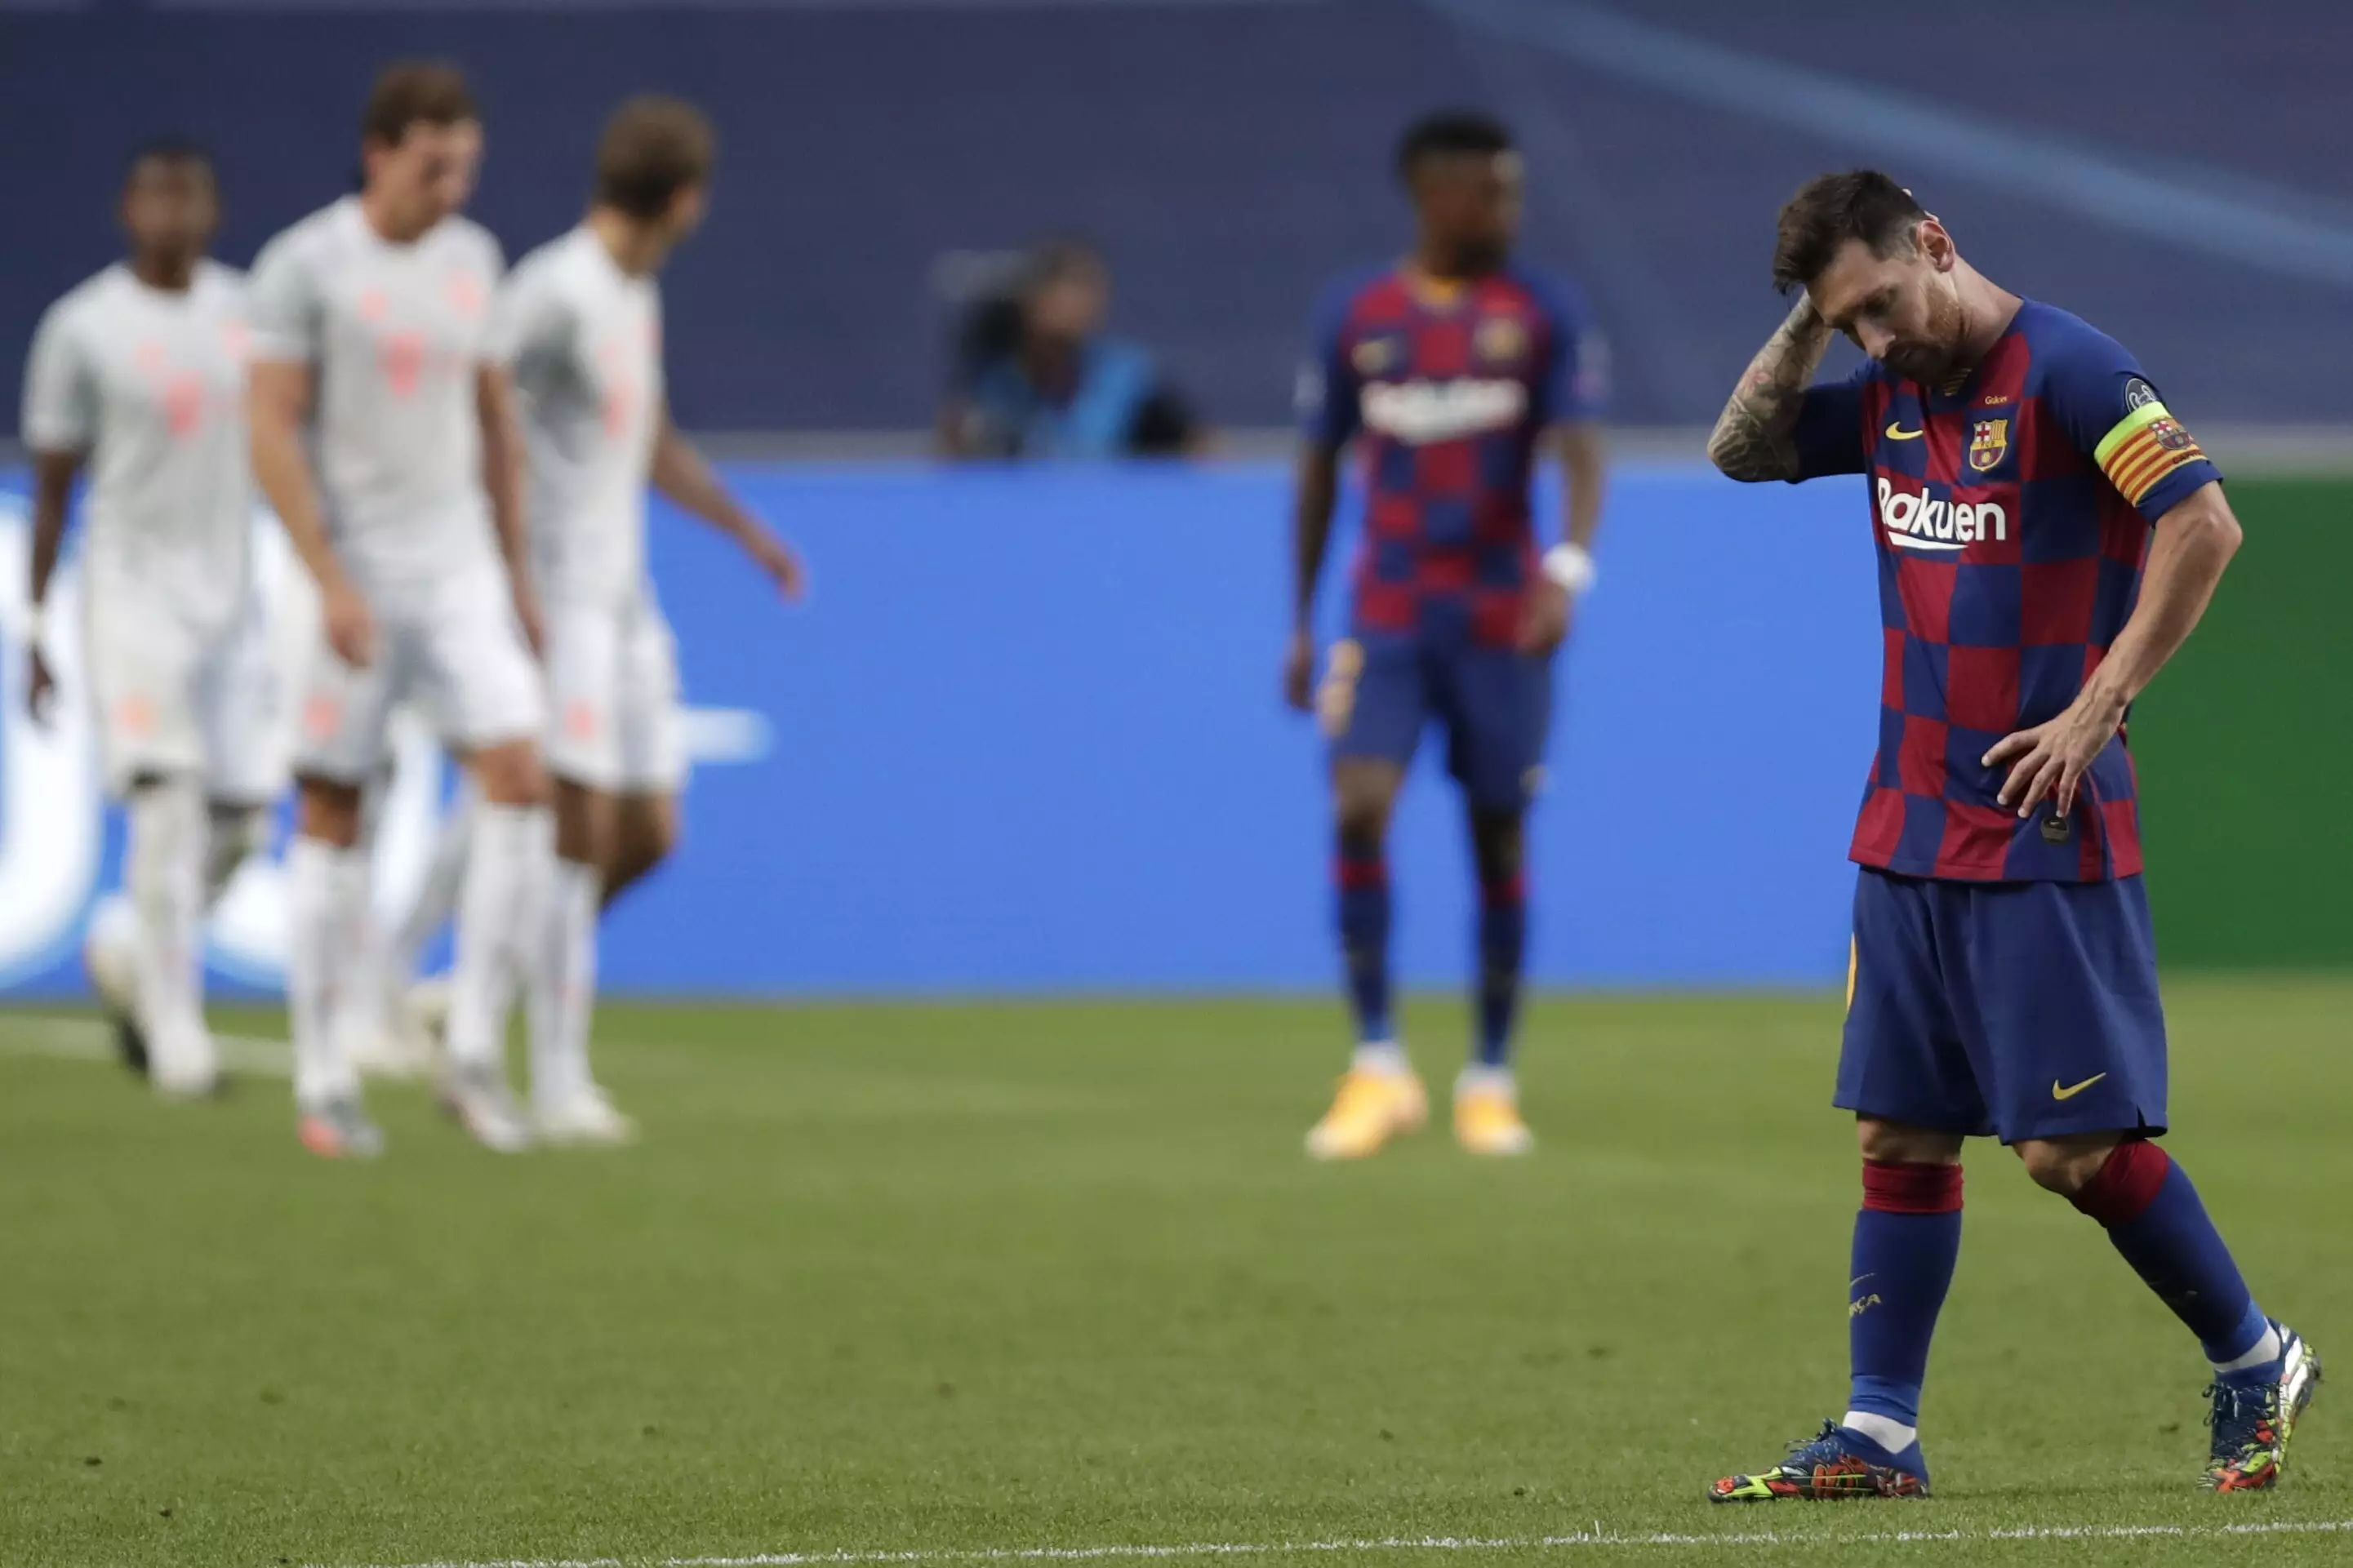 Messi sums up the mood after Friday's loss. Image: PA Images